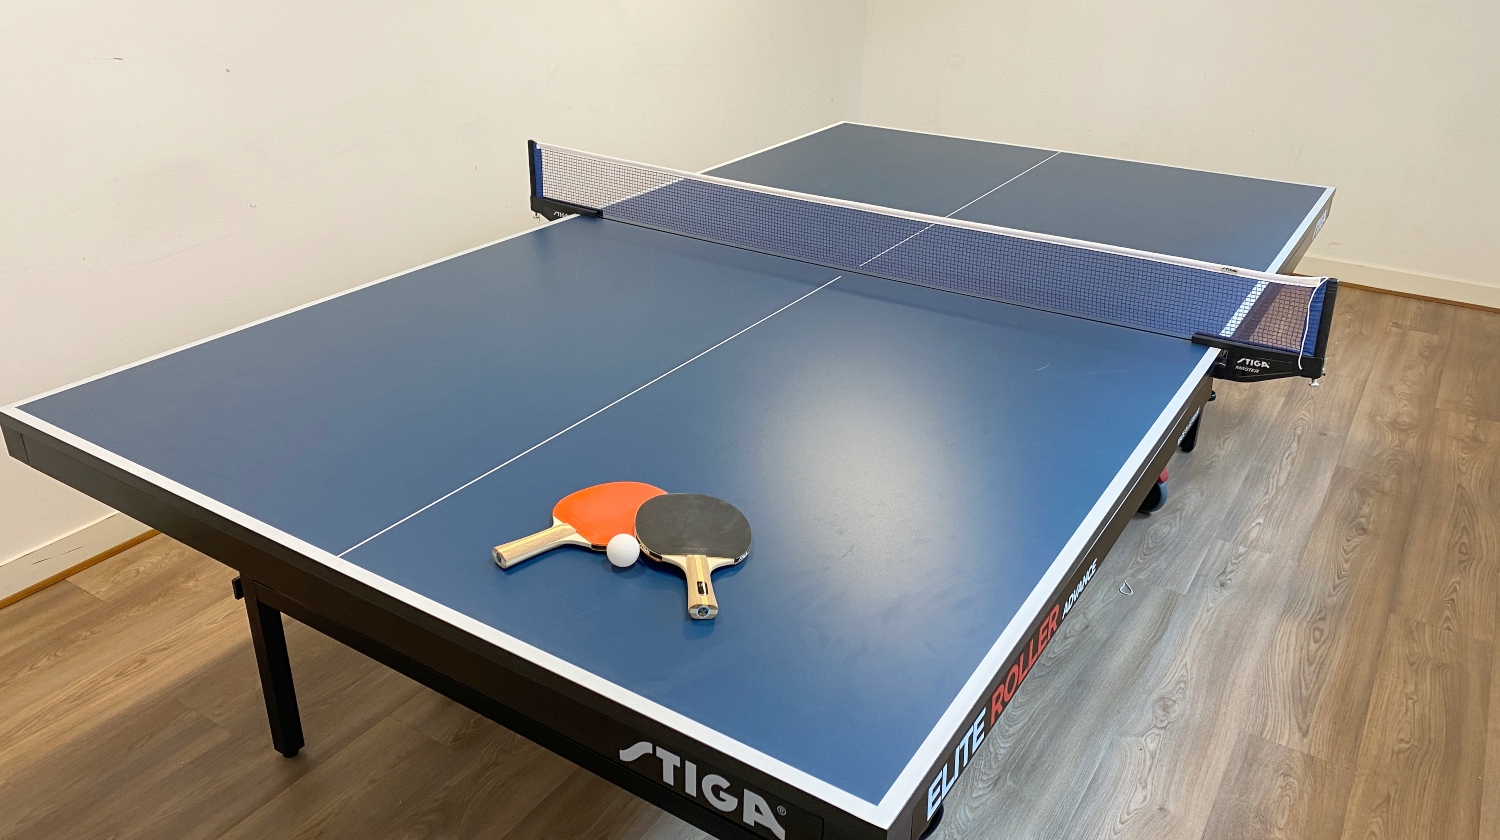 Blue ping pong table